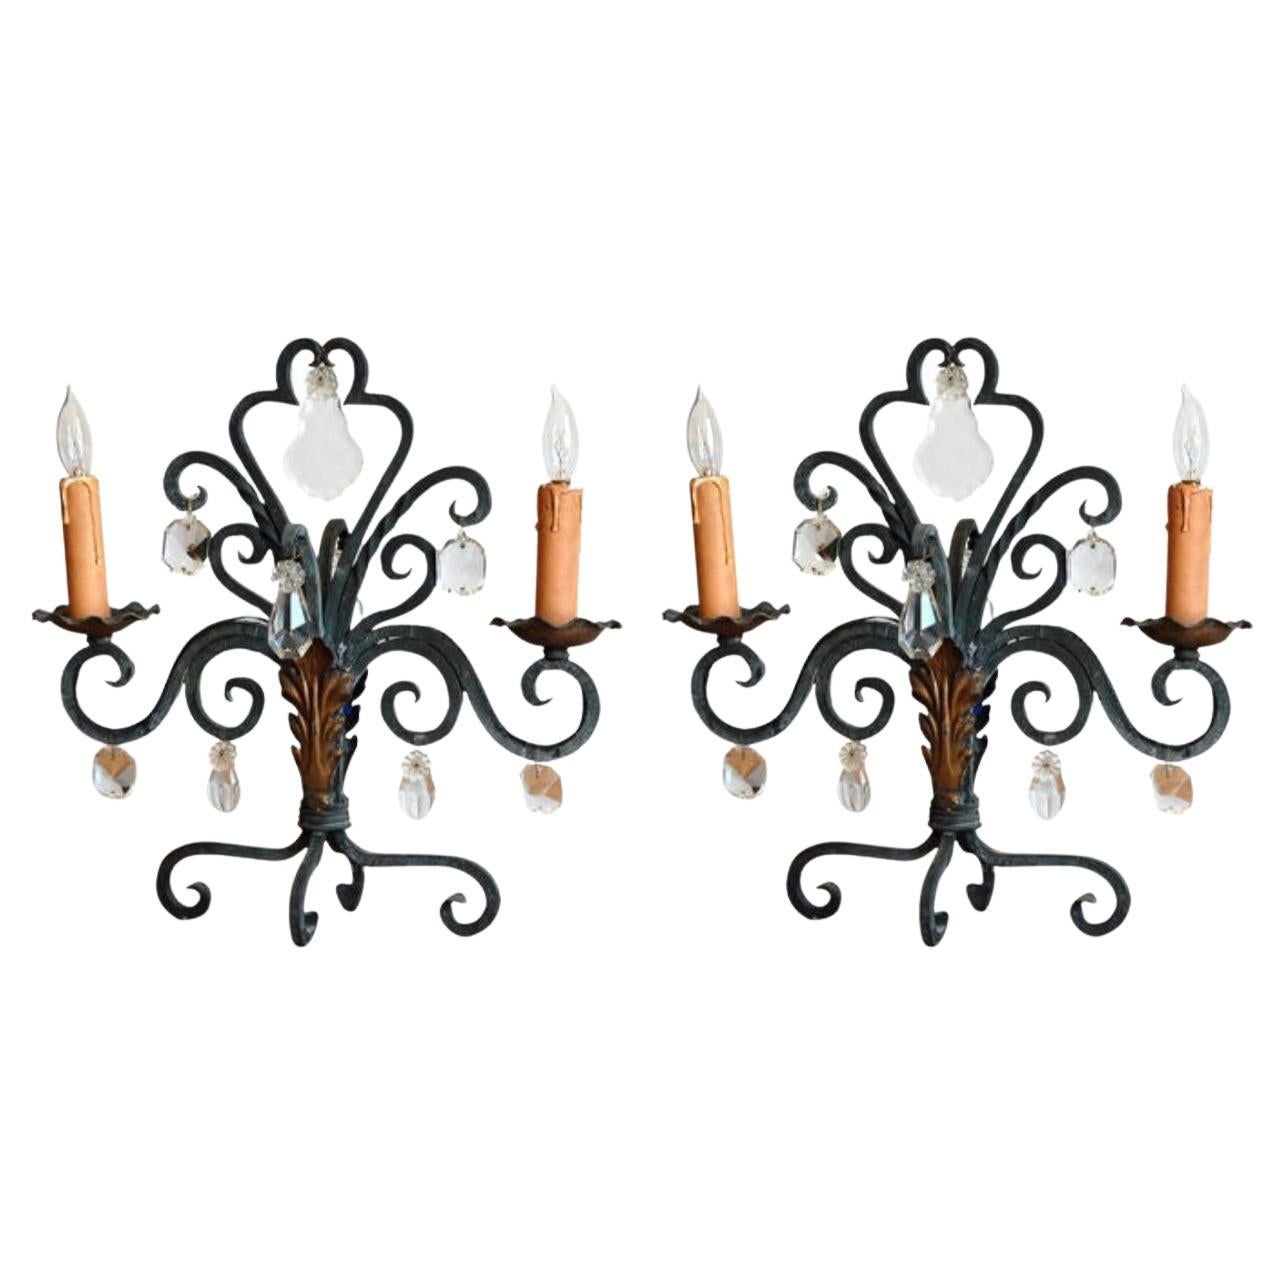 Pair of Chic French 1940s Candelabra Lights For Sale